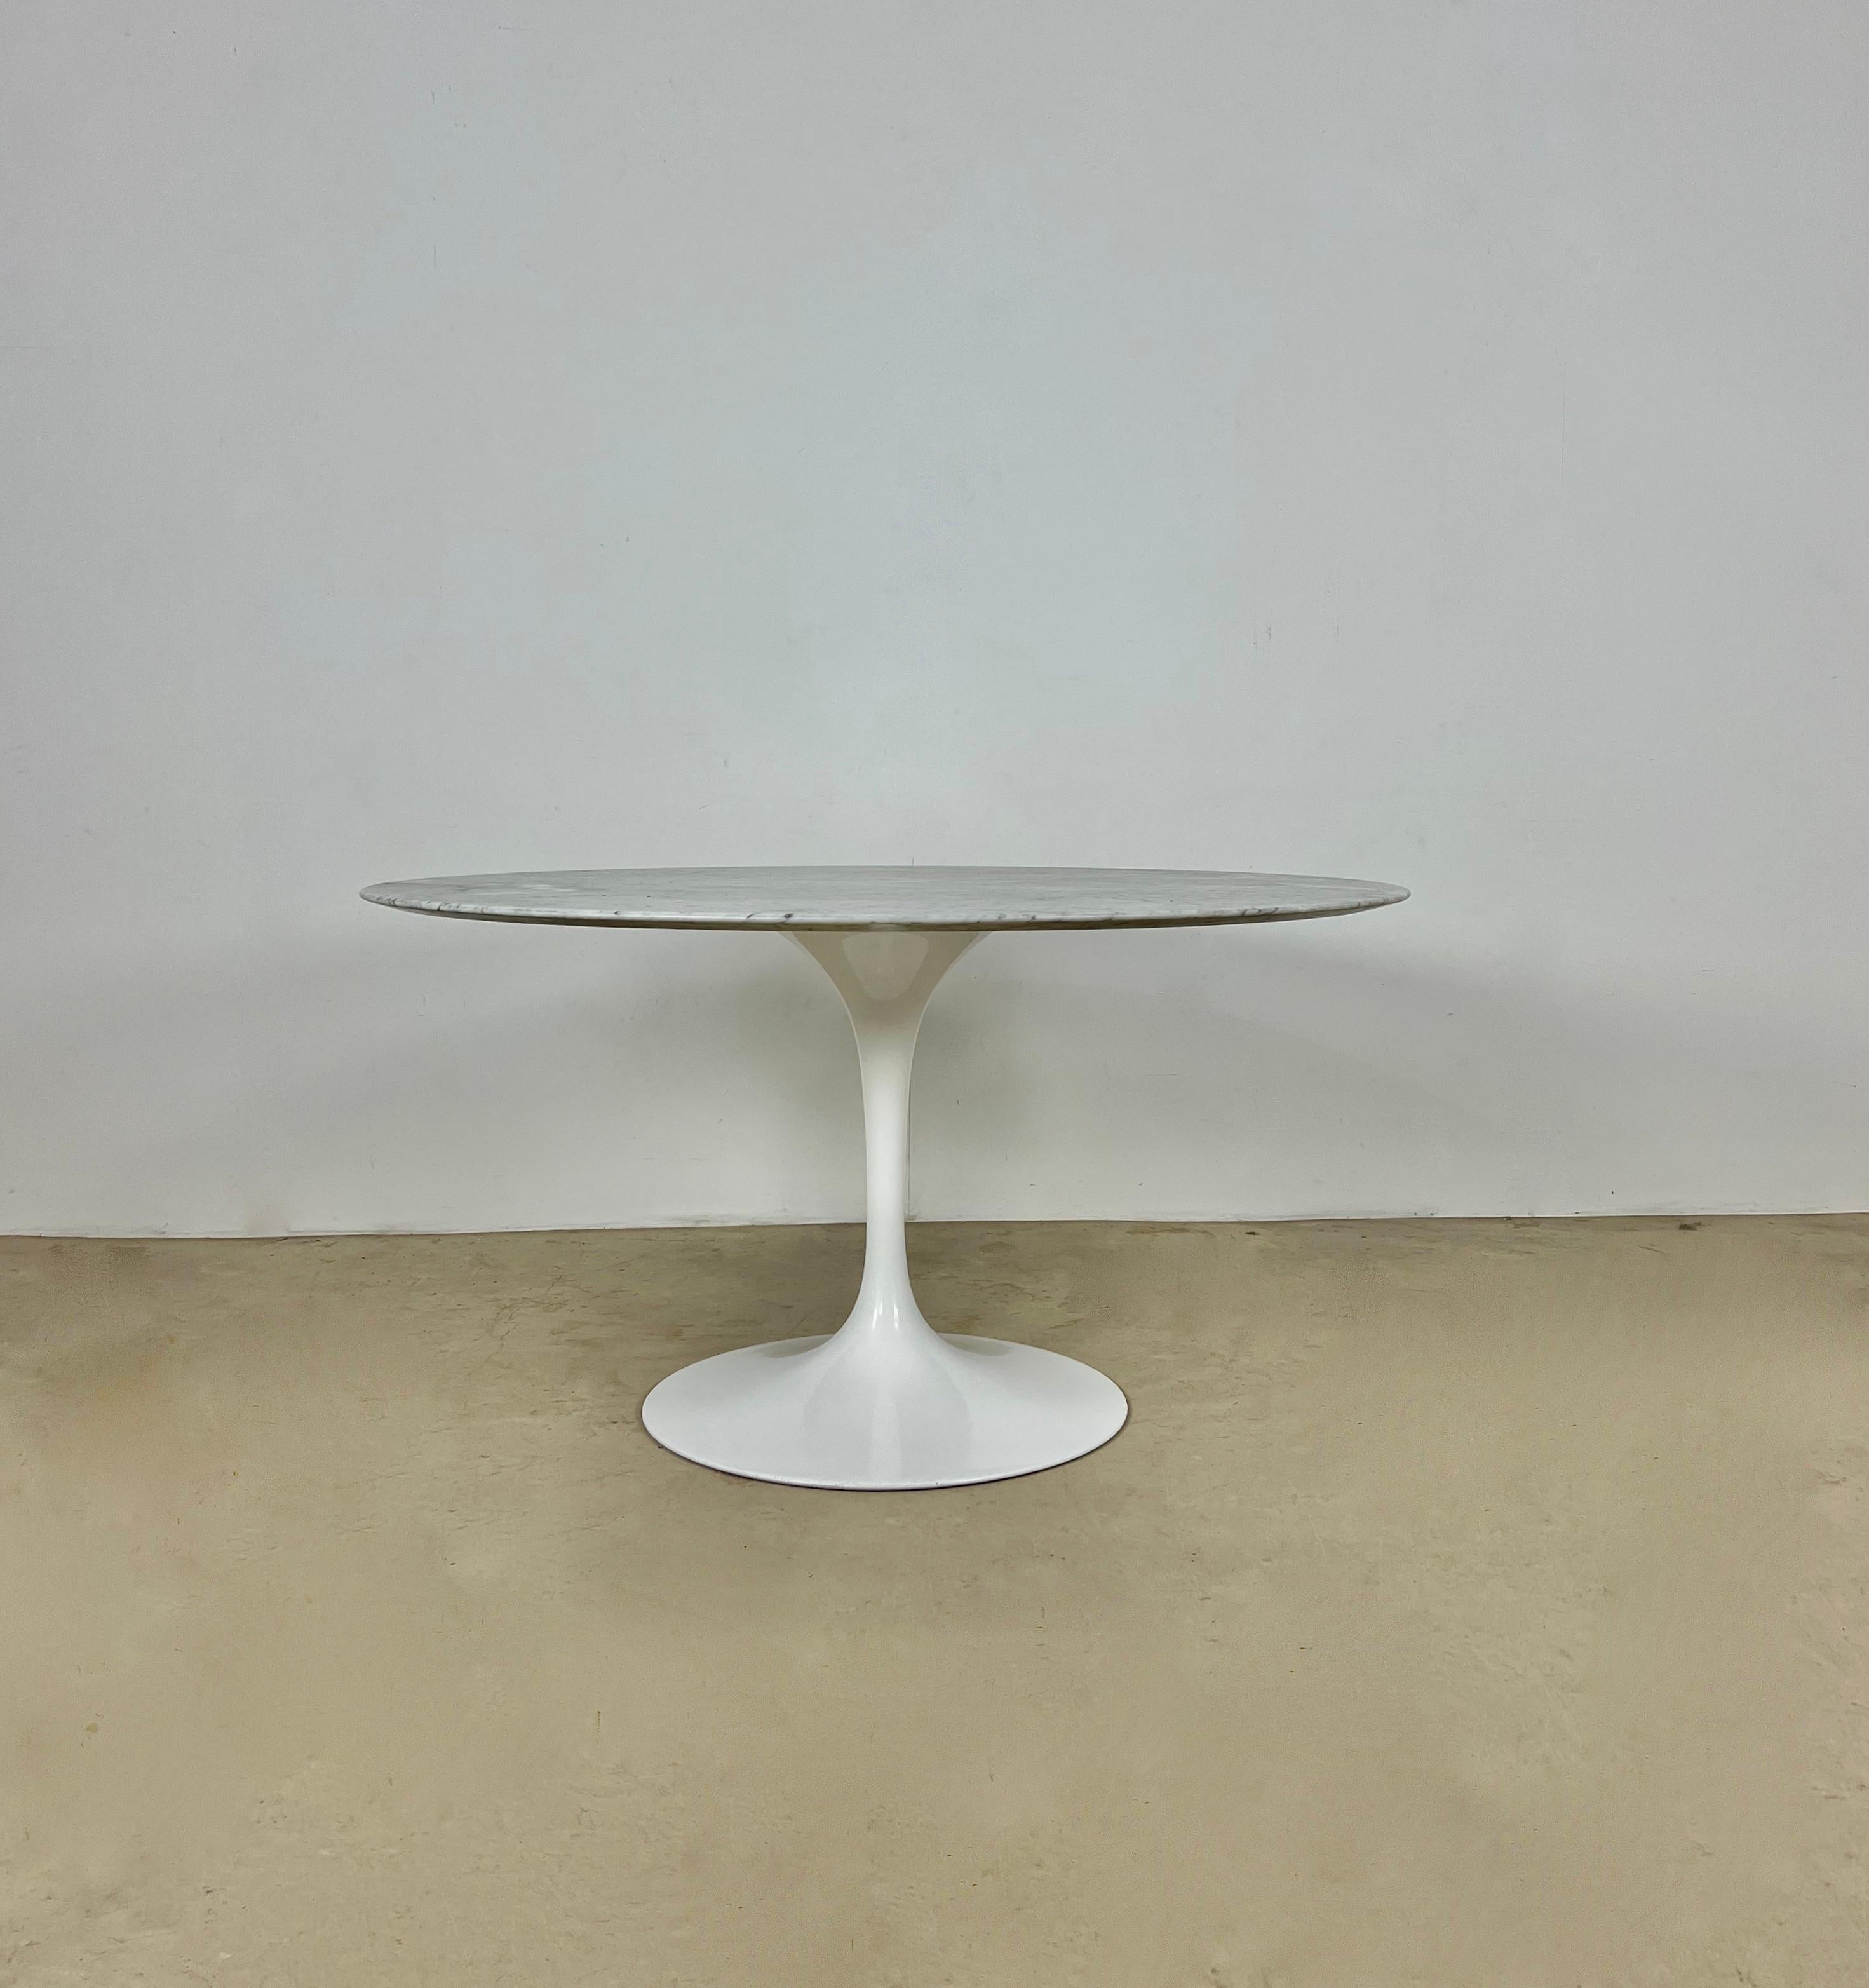 Table in Carrara marble. Foot stamped Knoll. Wear due to time and age of the table. The varnish has been removed and the table top reprocessed.